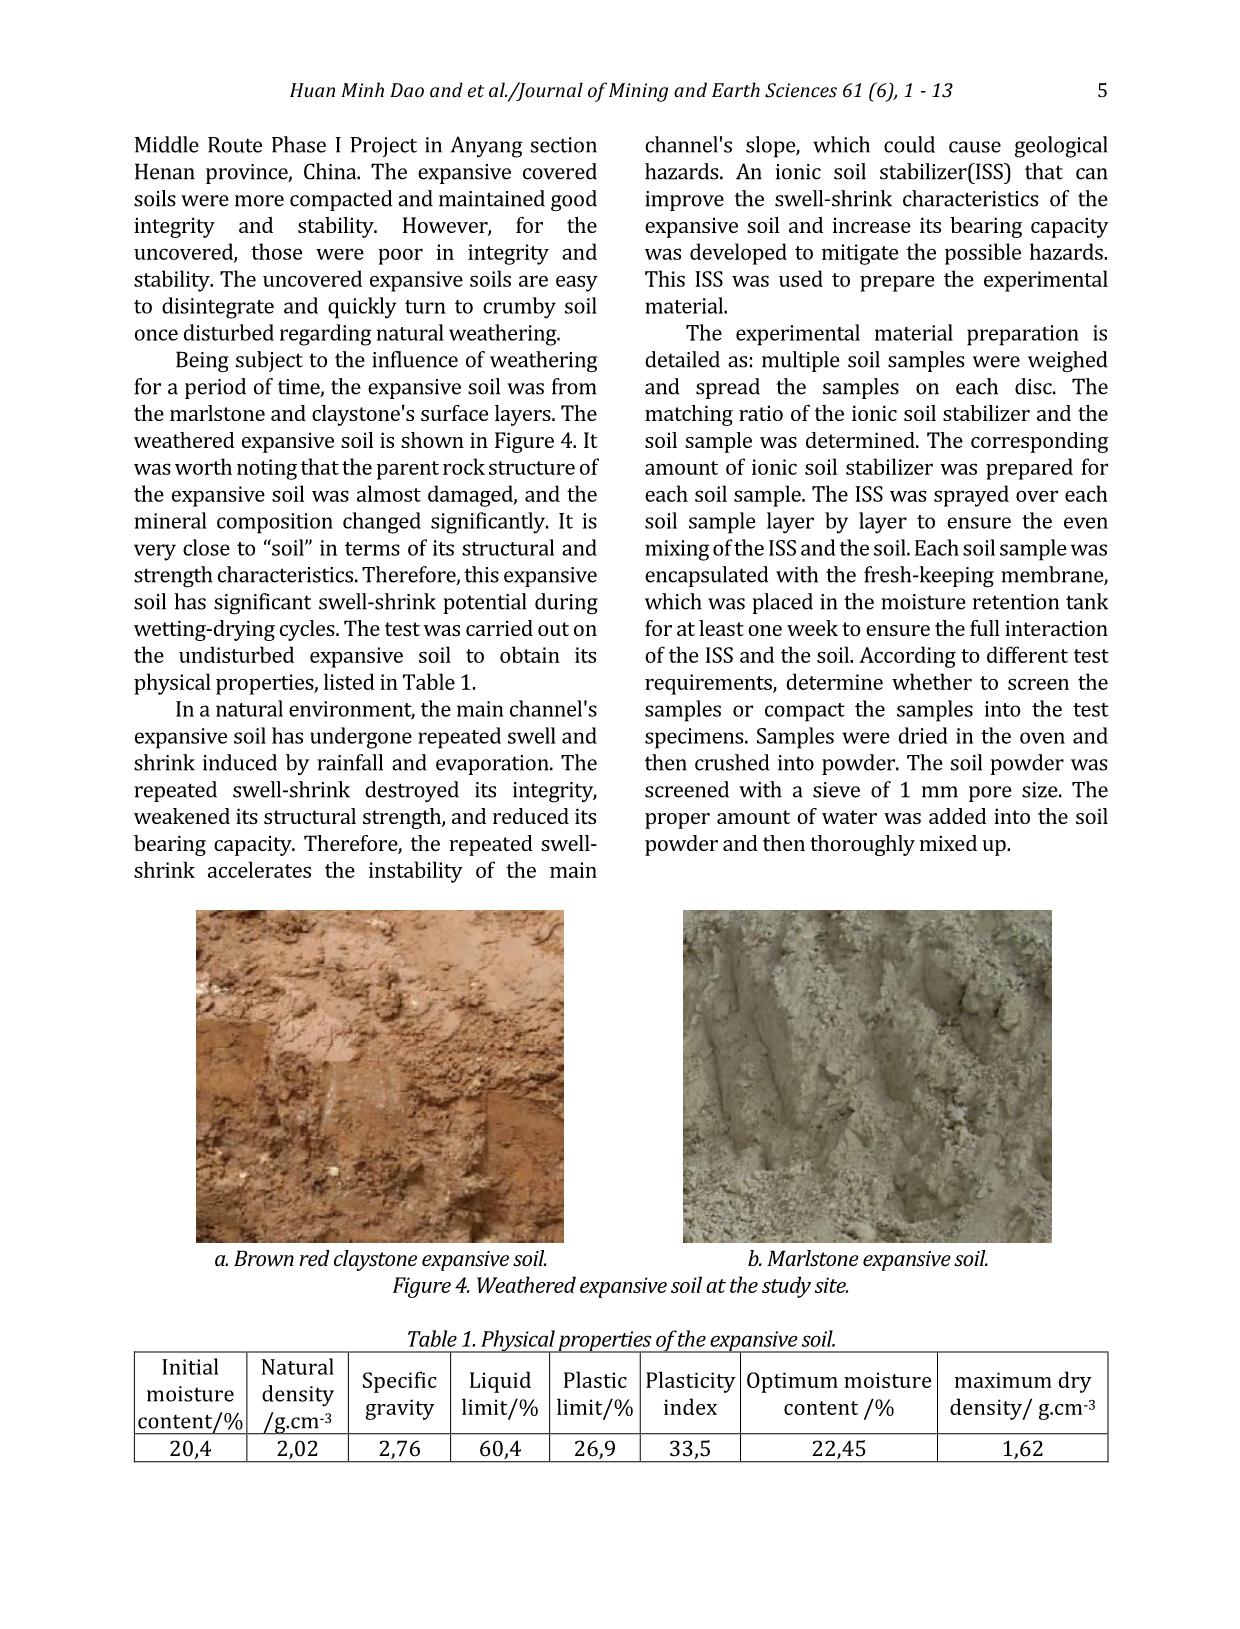 Effect of wetting-Drying cycles on surface cracking and swell-shrink behavior of expansive soil modified with ionic soil stabilizer trang 5